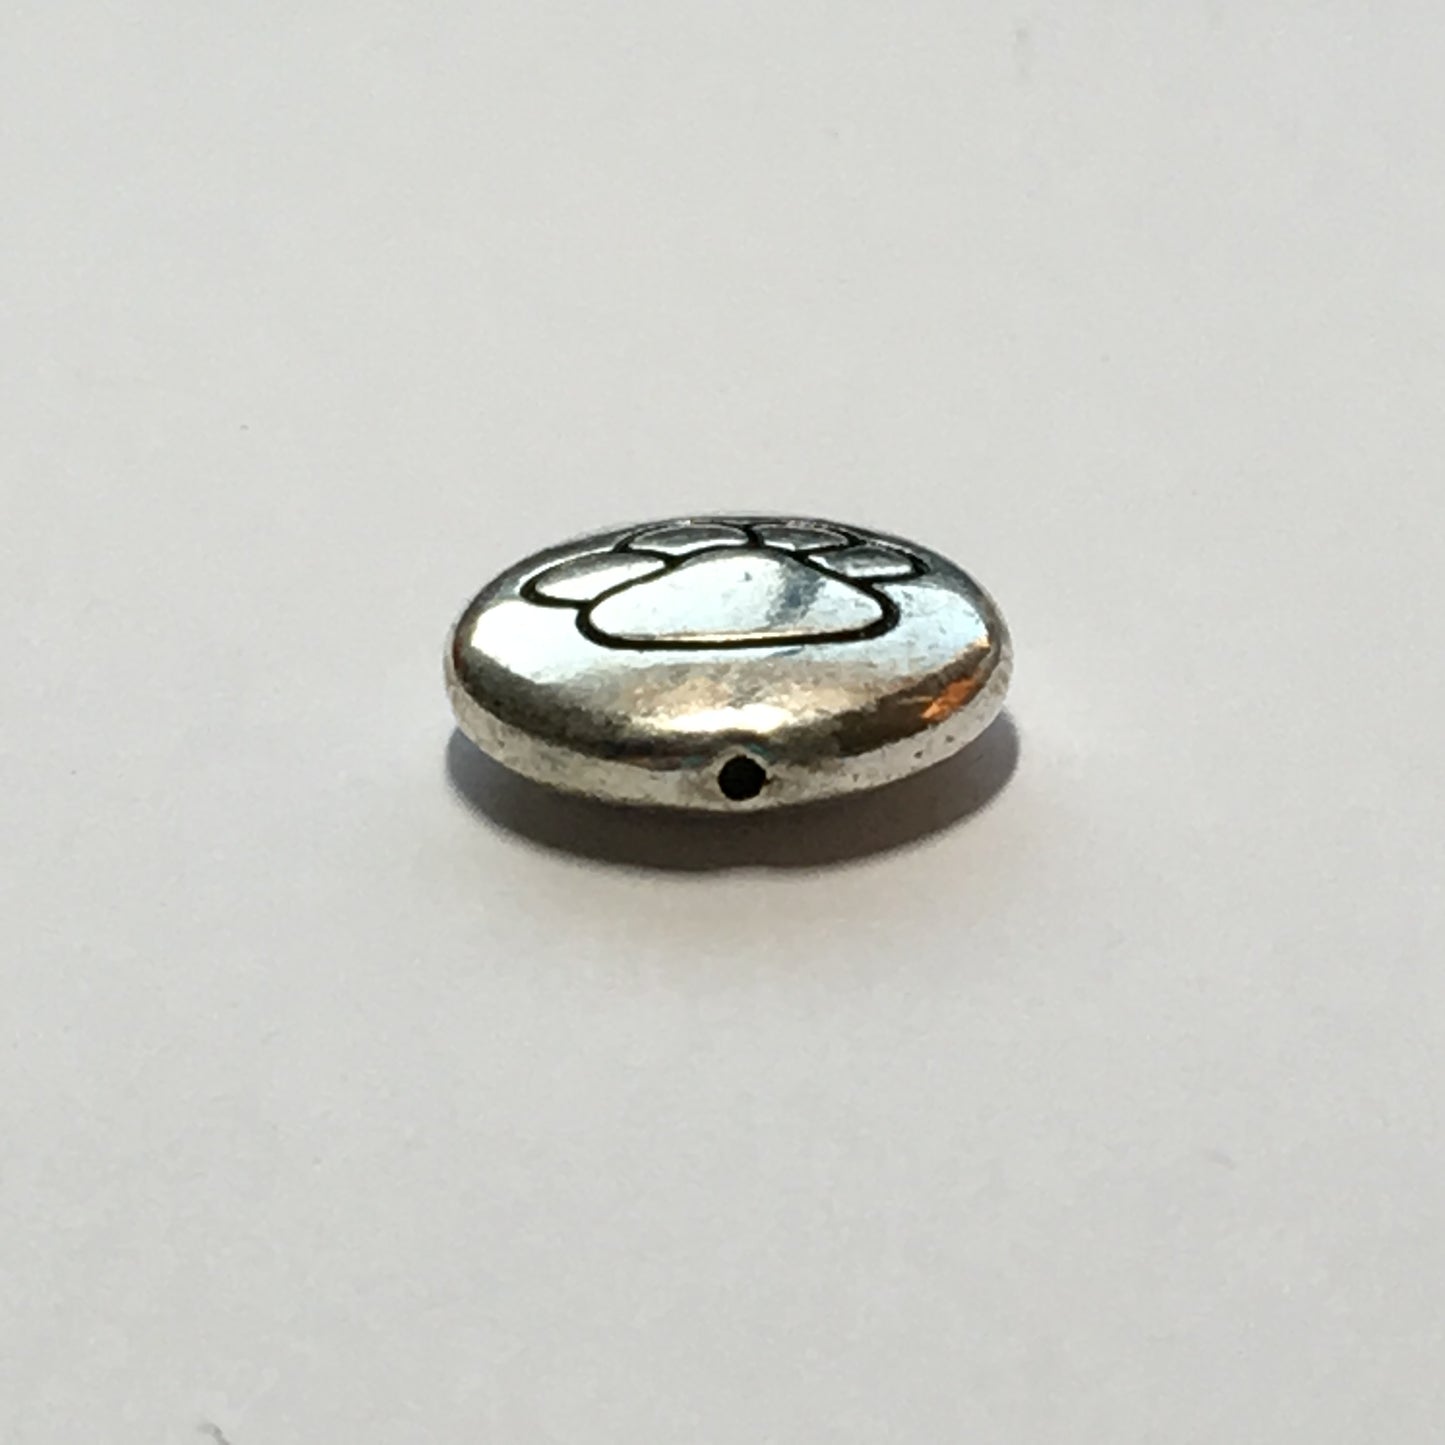 Silver Plated Paw Print Focal Bead, 13 x 4 mm